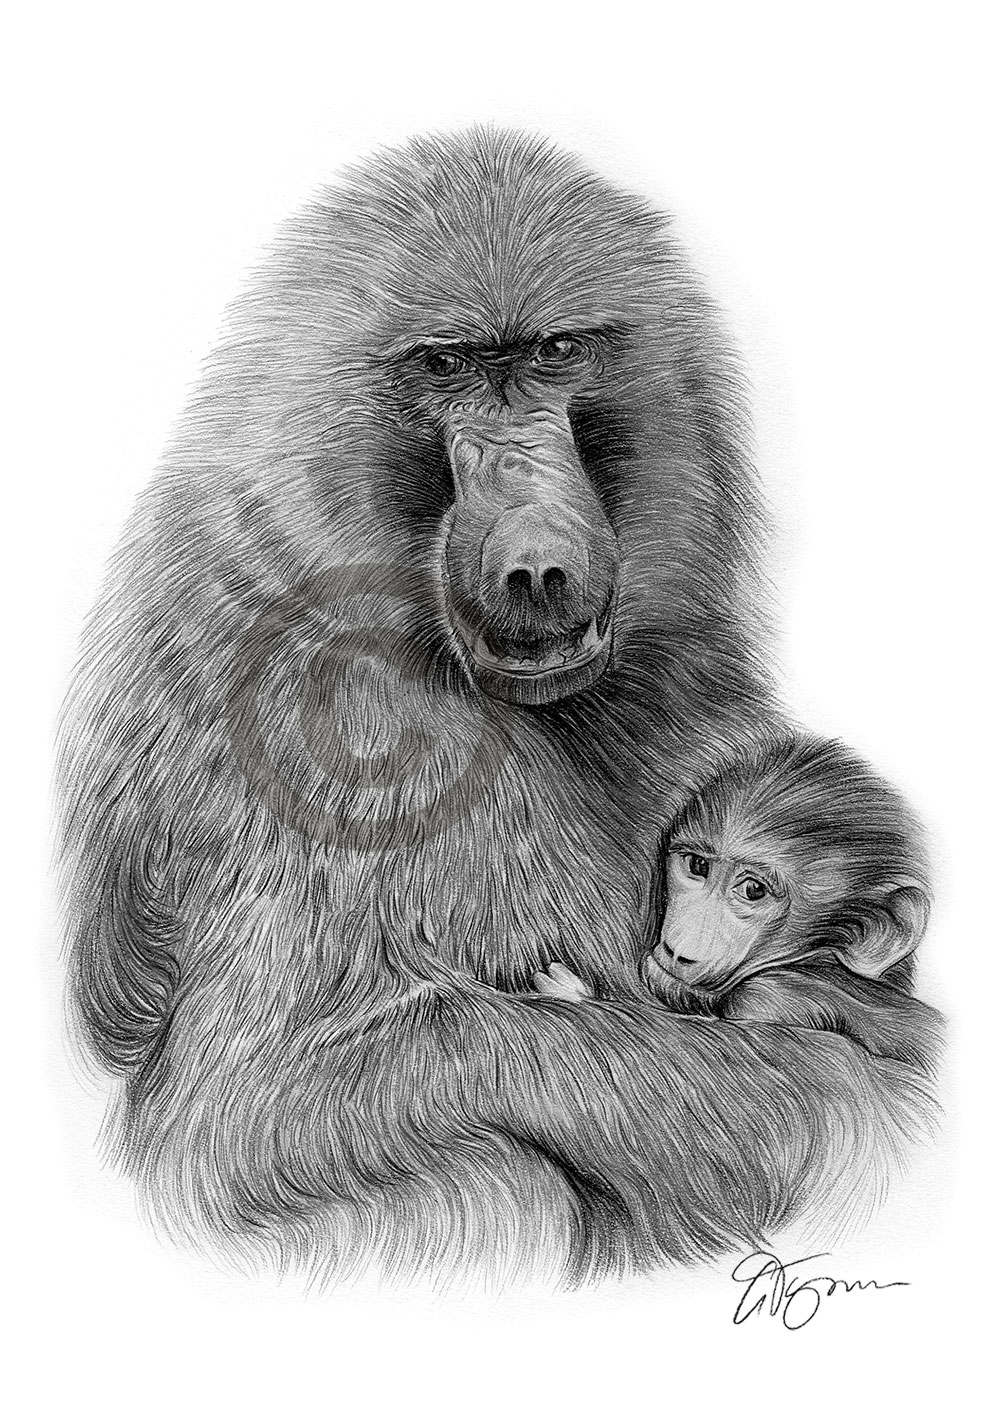 BABOON pencil drawing artwork print A3 / A4 sizes signed by UK artist G